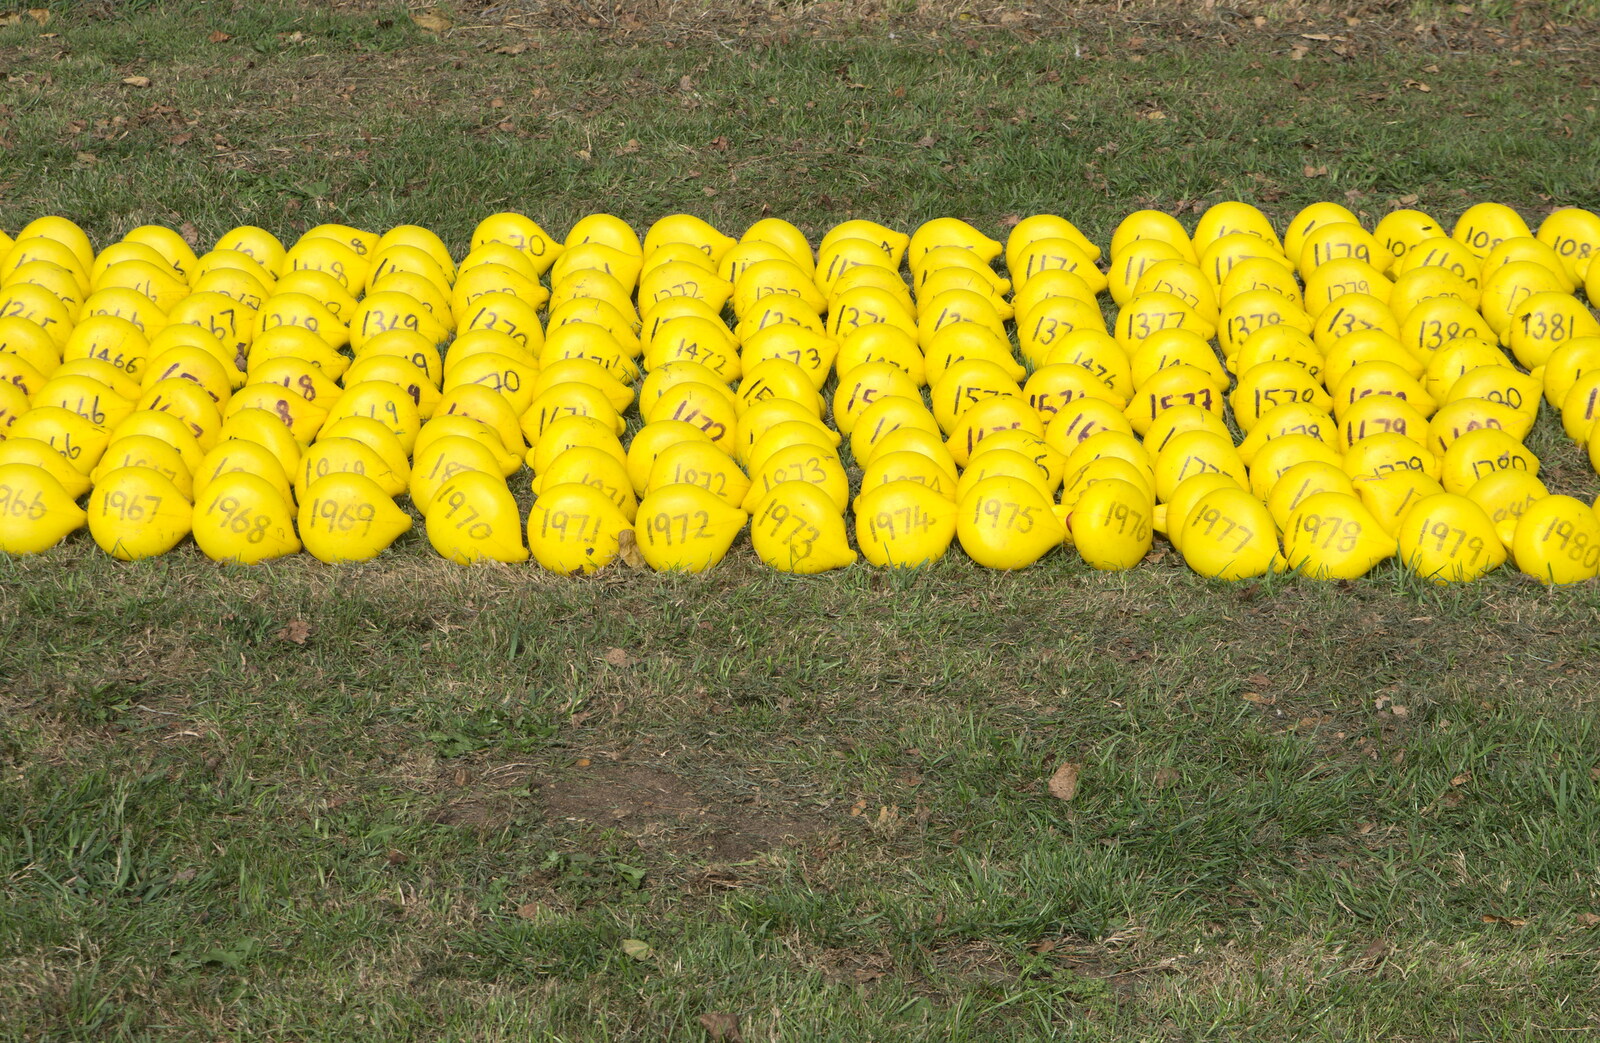 Numbered ducks from The Eye Scouts Duck Race, The Pennings, Eye, Suffolk - 24th September 2016